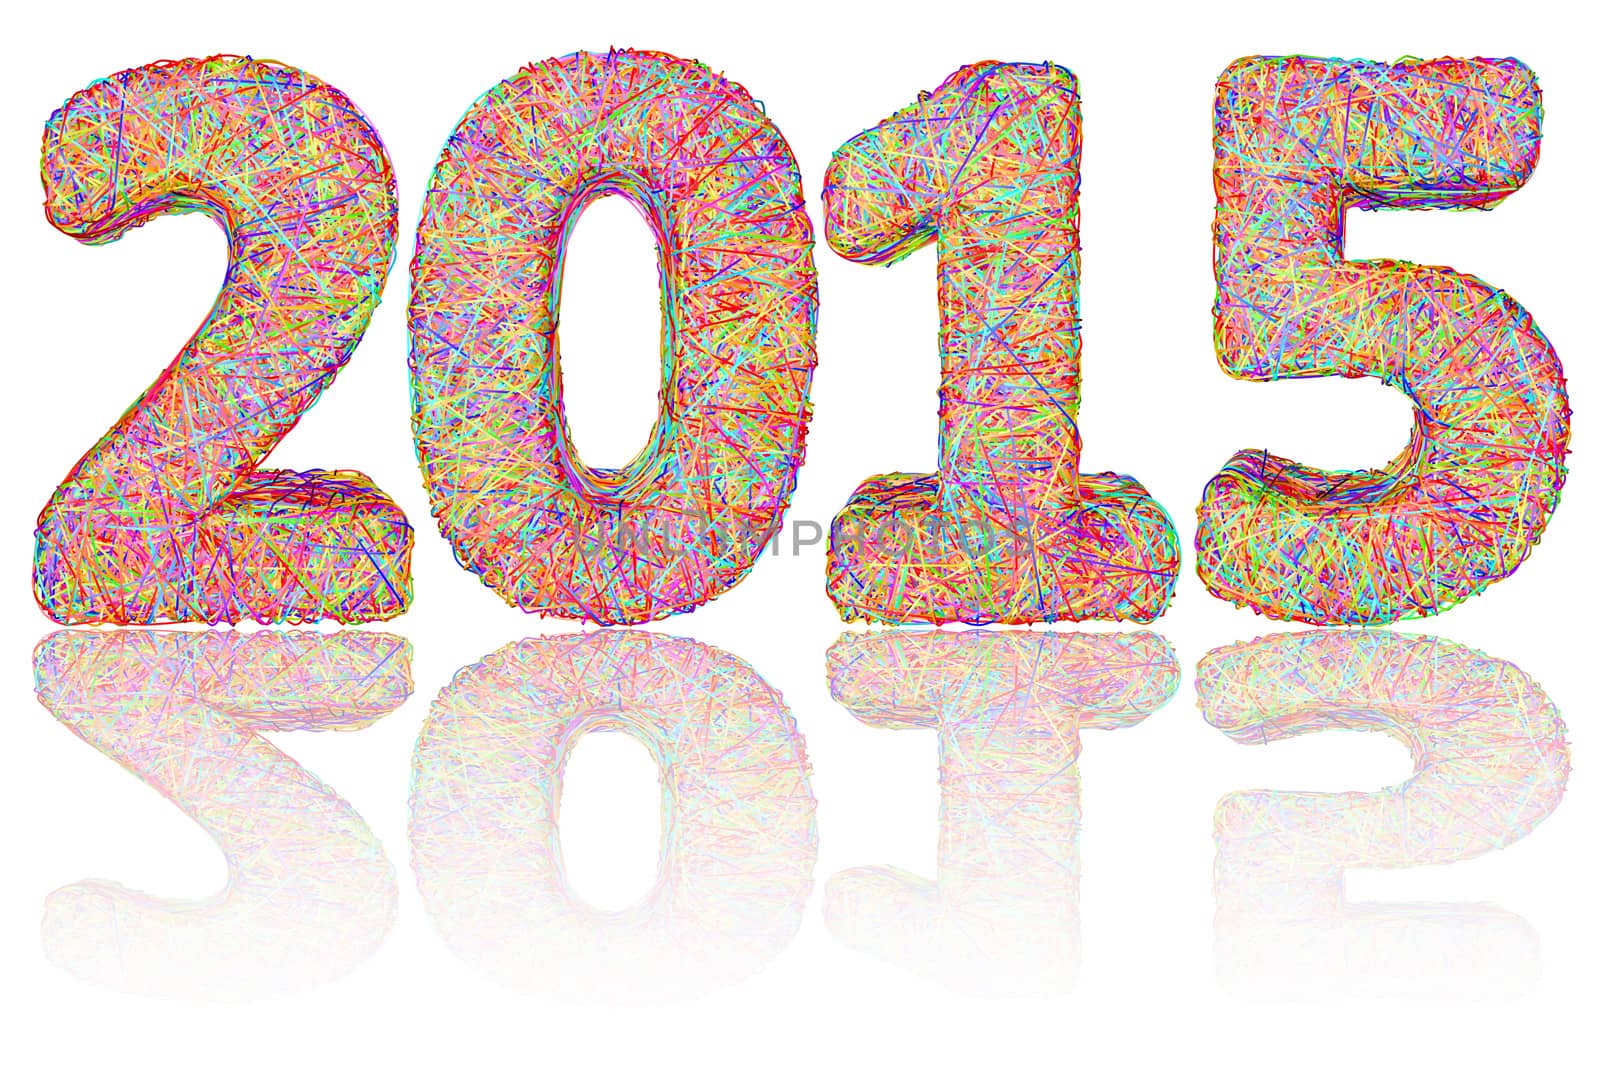 2015 digits composed of colorful stripes on glossy white background. High resolution 3D image
